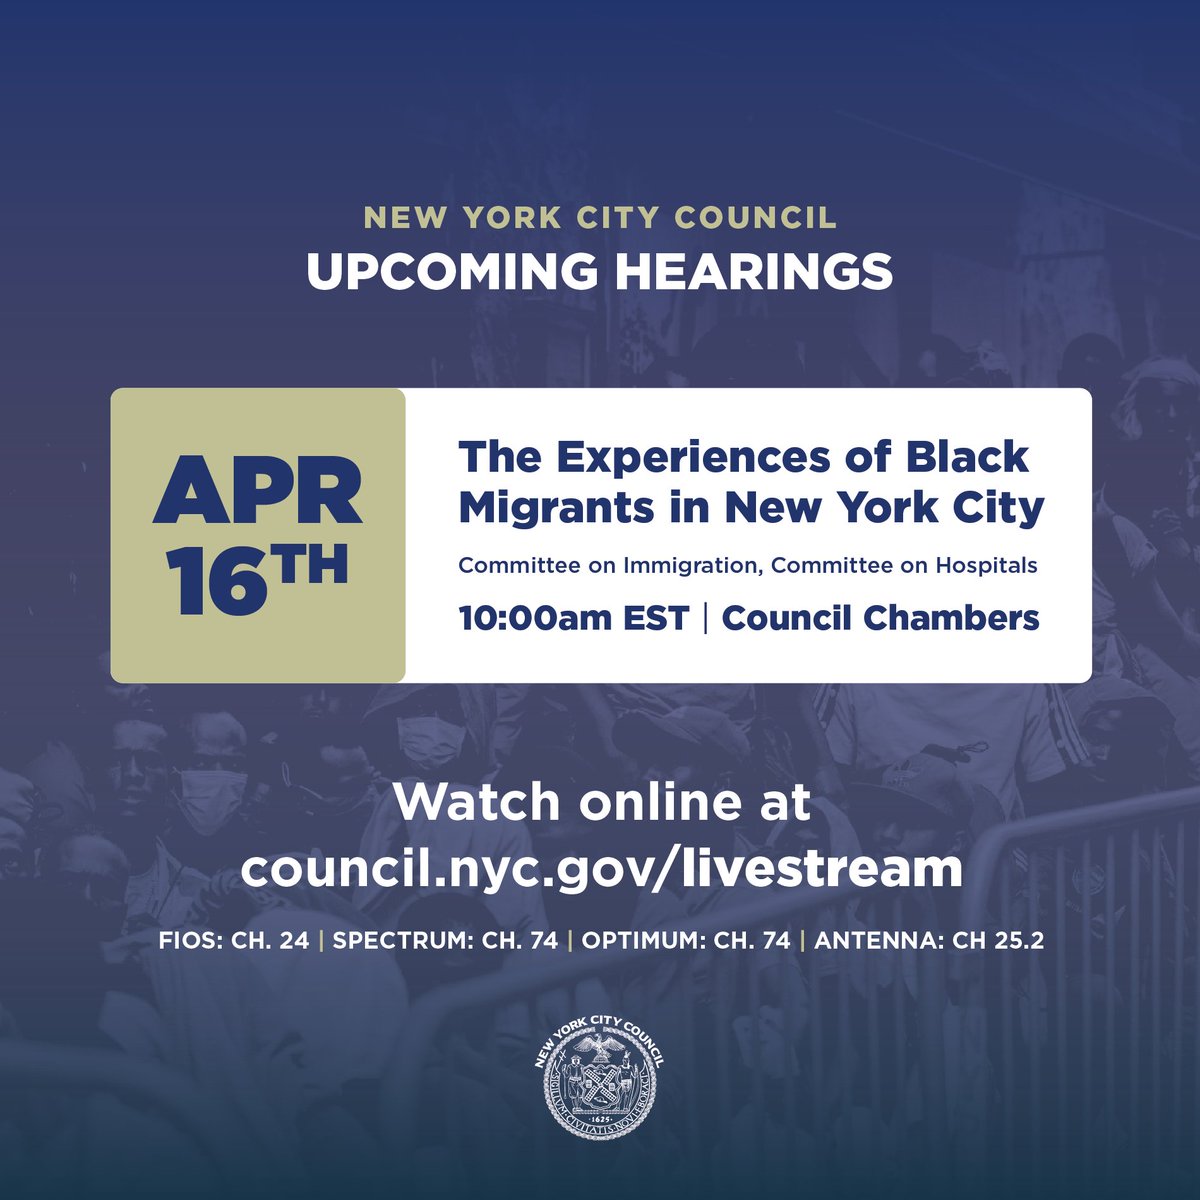 Tomorrow at 10:00am: The Committee on Immigration and the Committee on Hospitals will hold a joint oversight hearing on the experiences of Black migrants in New York City. 📺 Watch live: council.nyc.gov/livestream